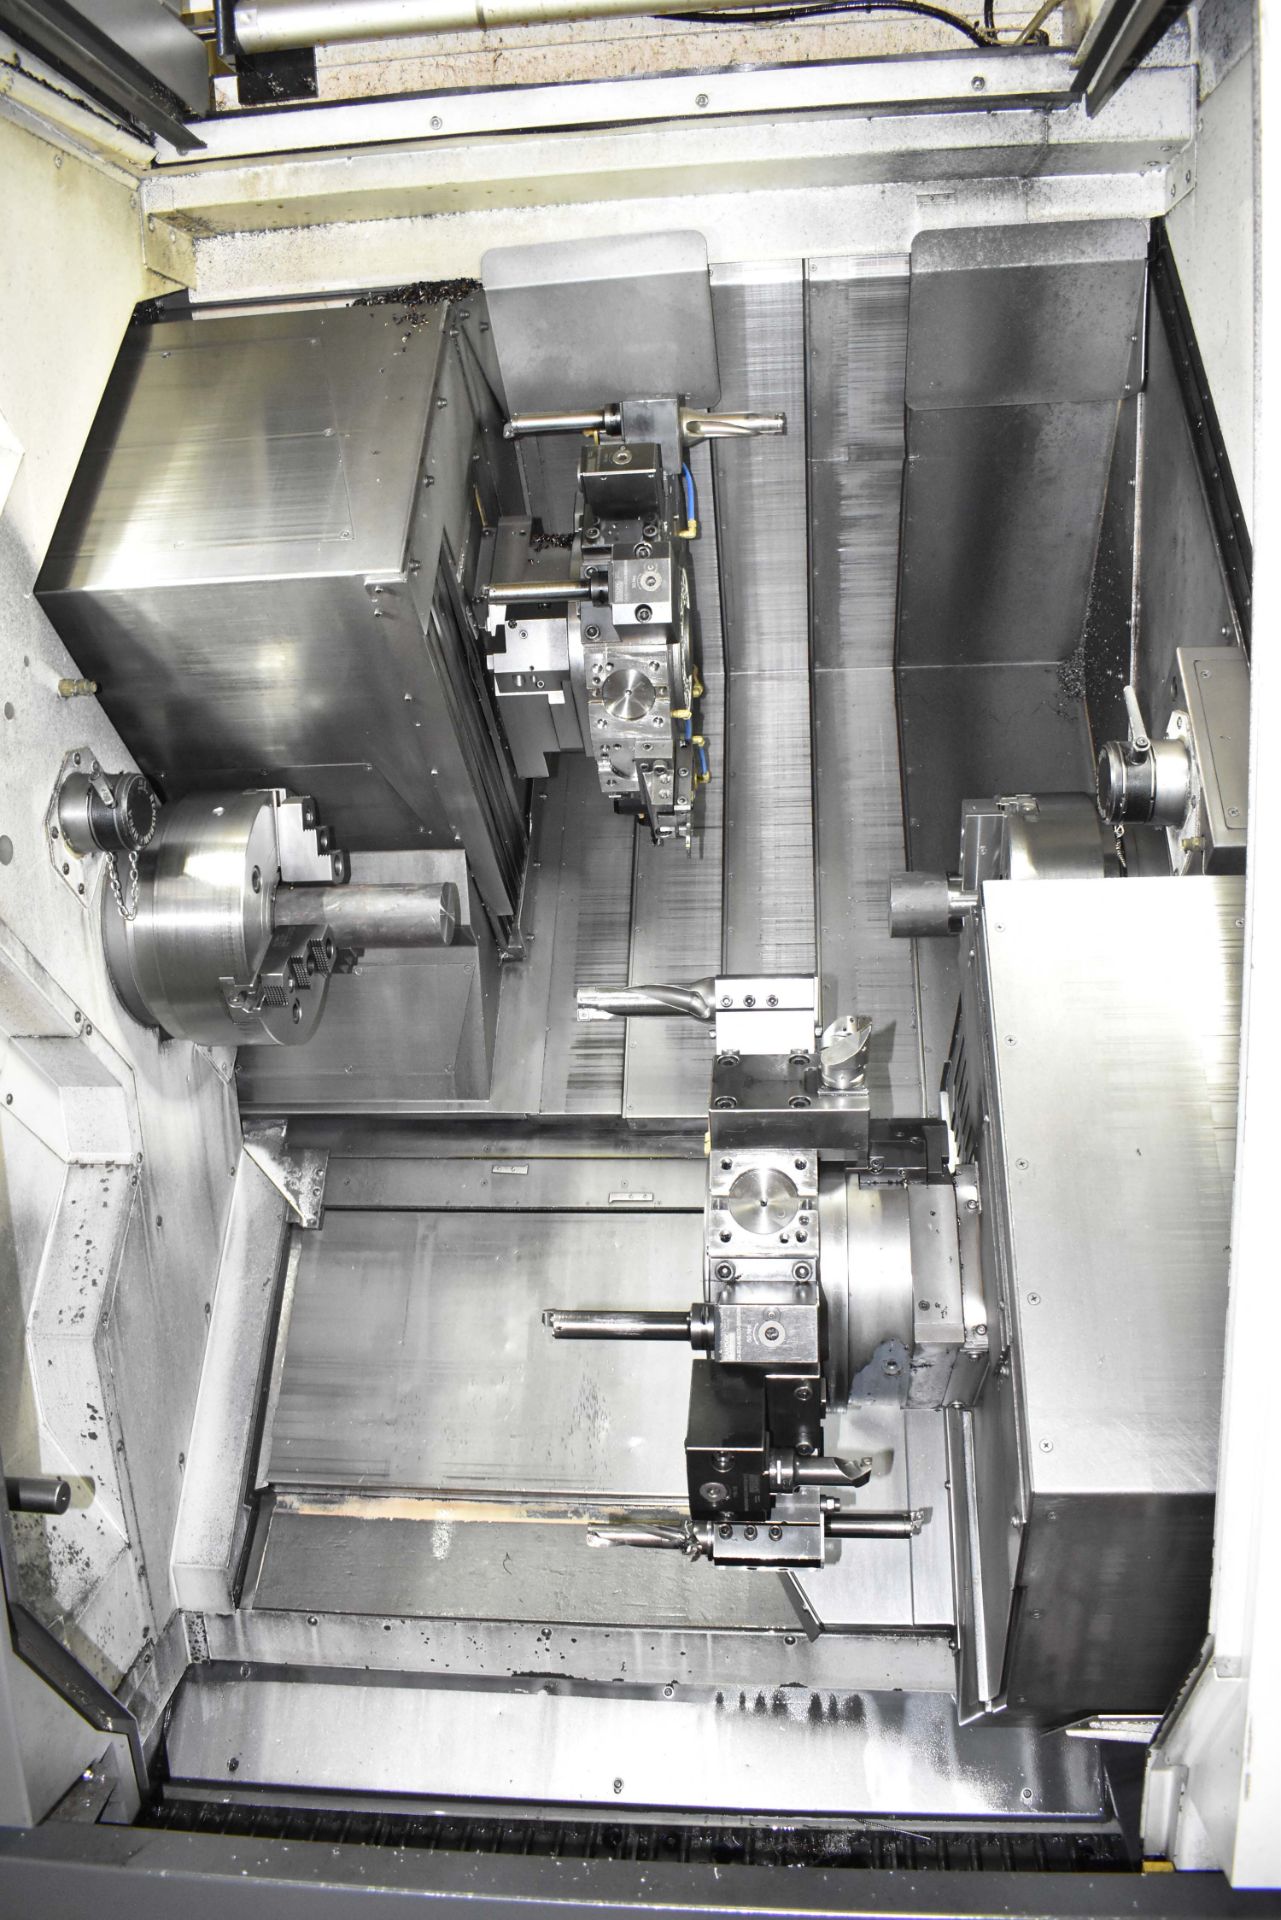 NAKAMURA-TOME (2018) WT-300 MULTI-AXIS OPPOSED SPINDLE AND TWIN TURRET CNC MULTI-TASKING CENTER WITH - Image 2 of 14